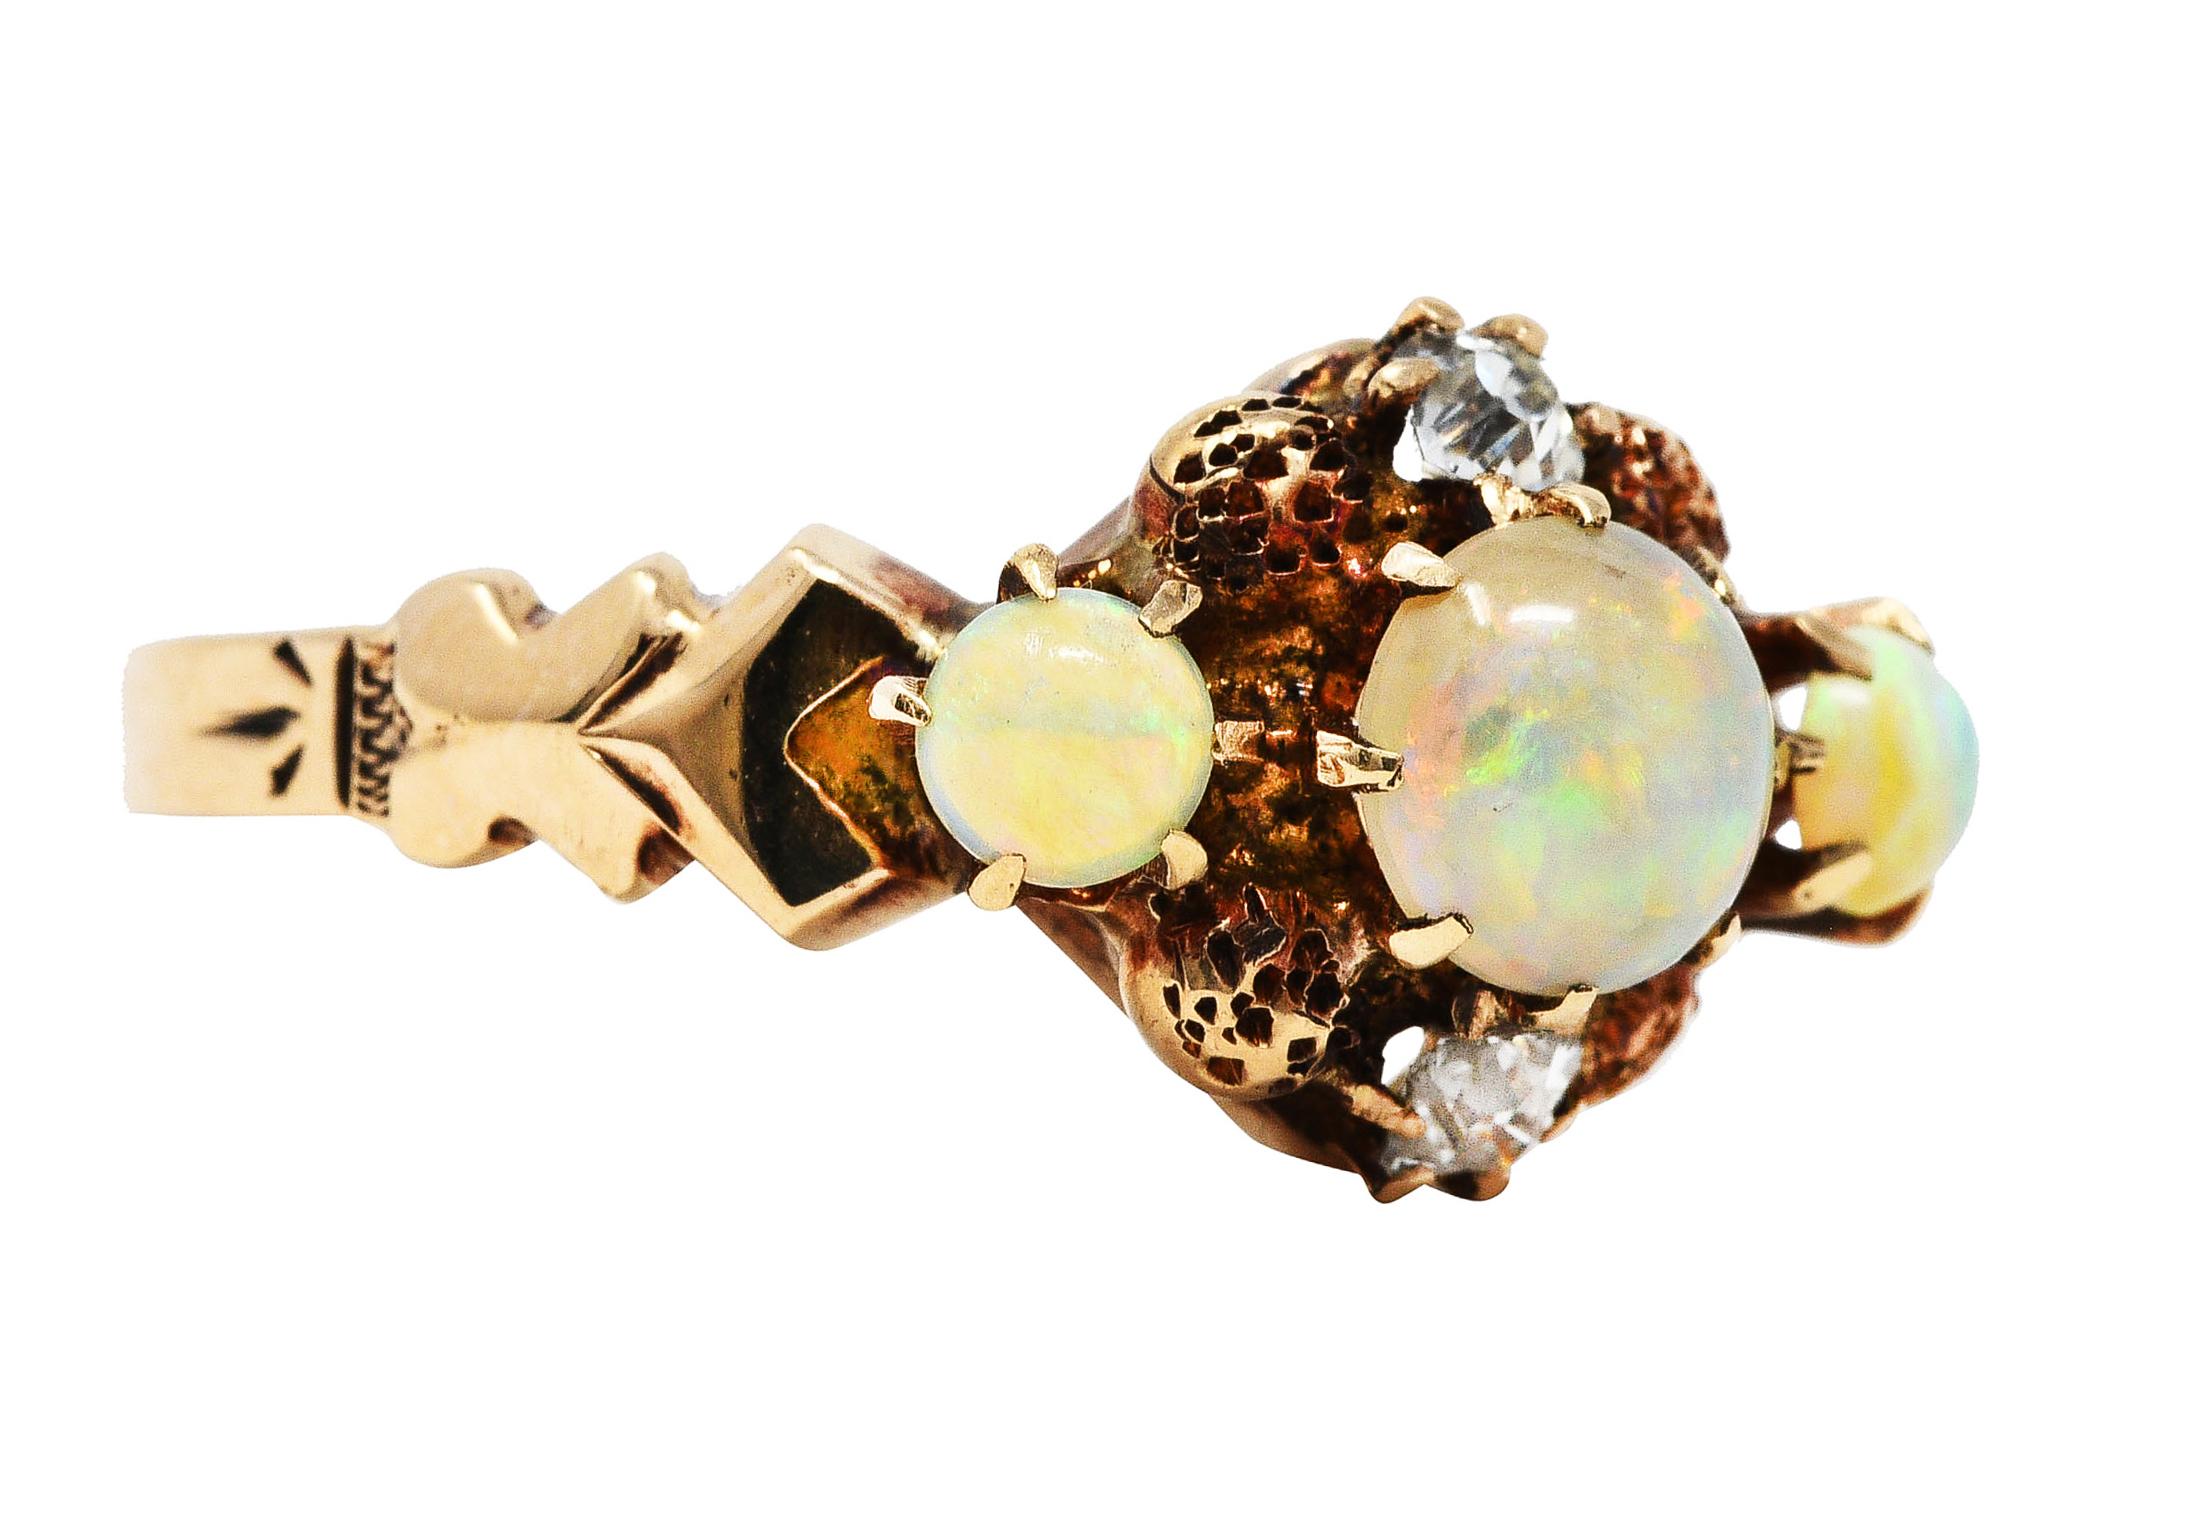 Cluster style ring designed with stylized head and shoulders

Centering one 5.0 mm and two 3.0 mm round cabochon opals in belcher settings

Opals are translucent and white in body color with strong blue/green play of color

Featuring two old mine